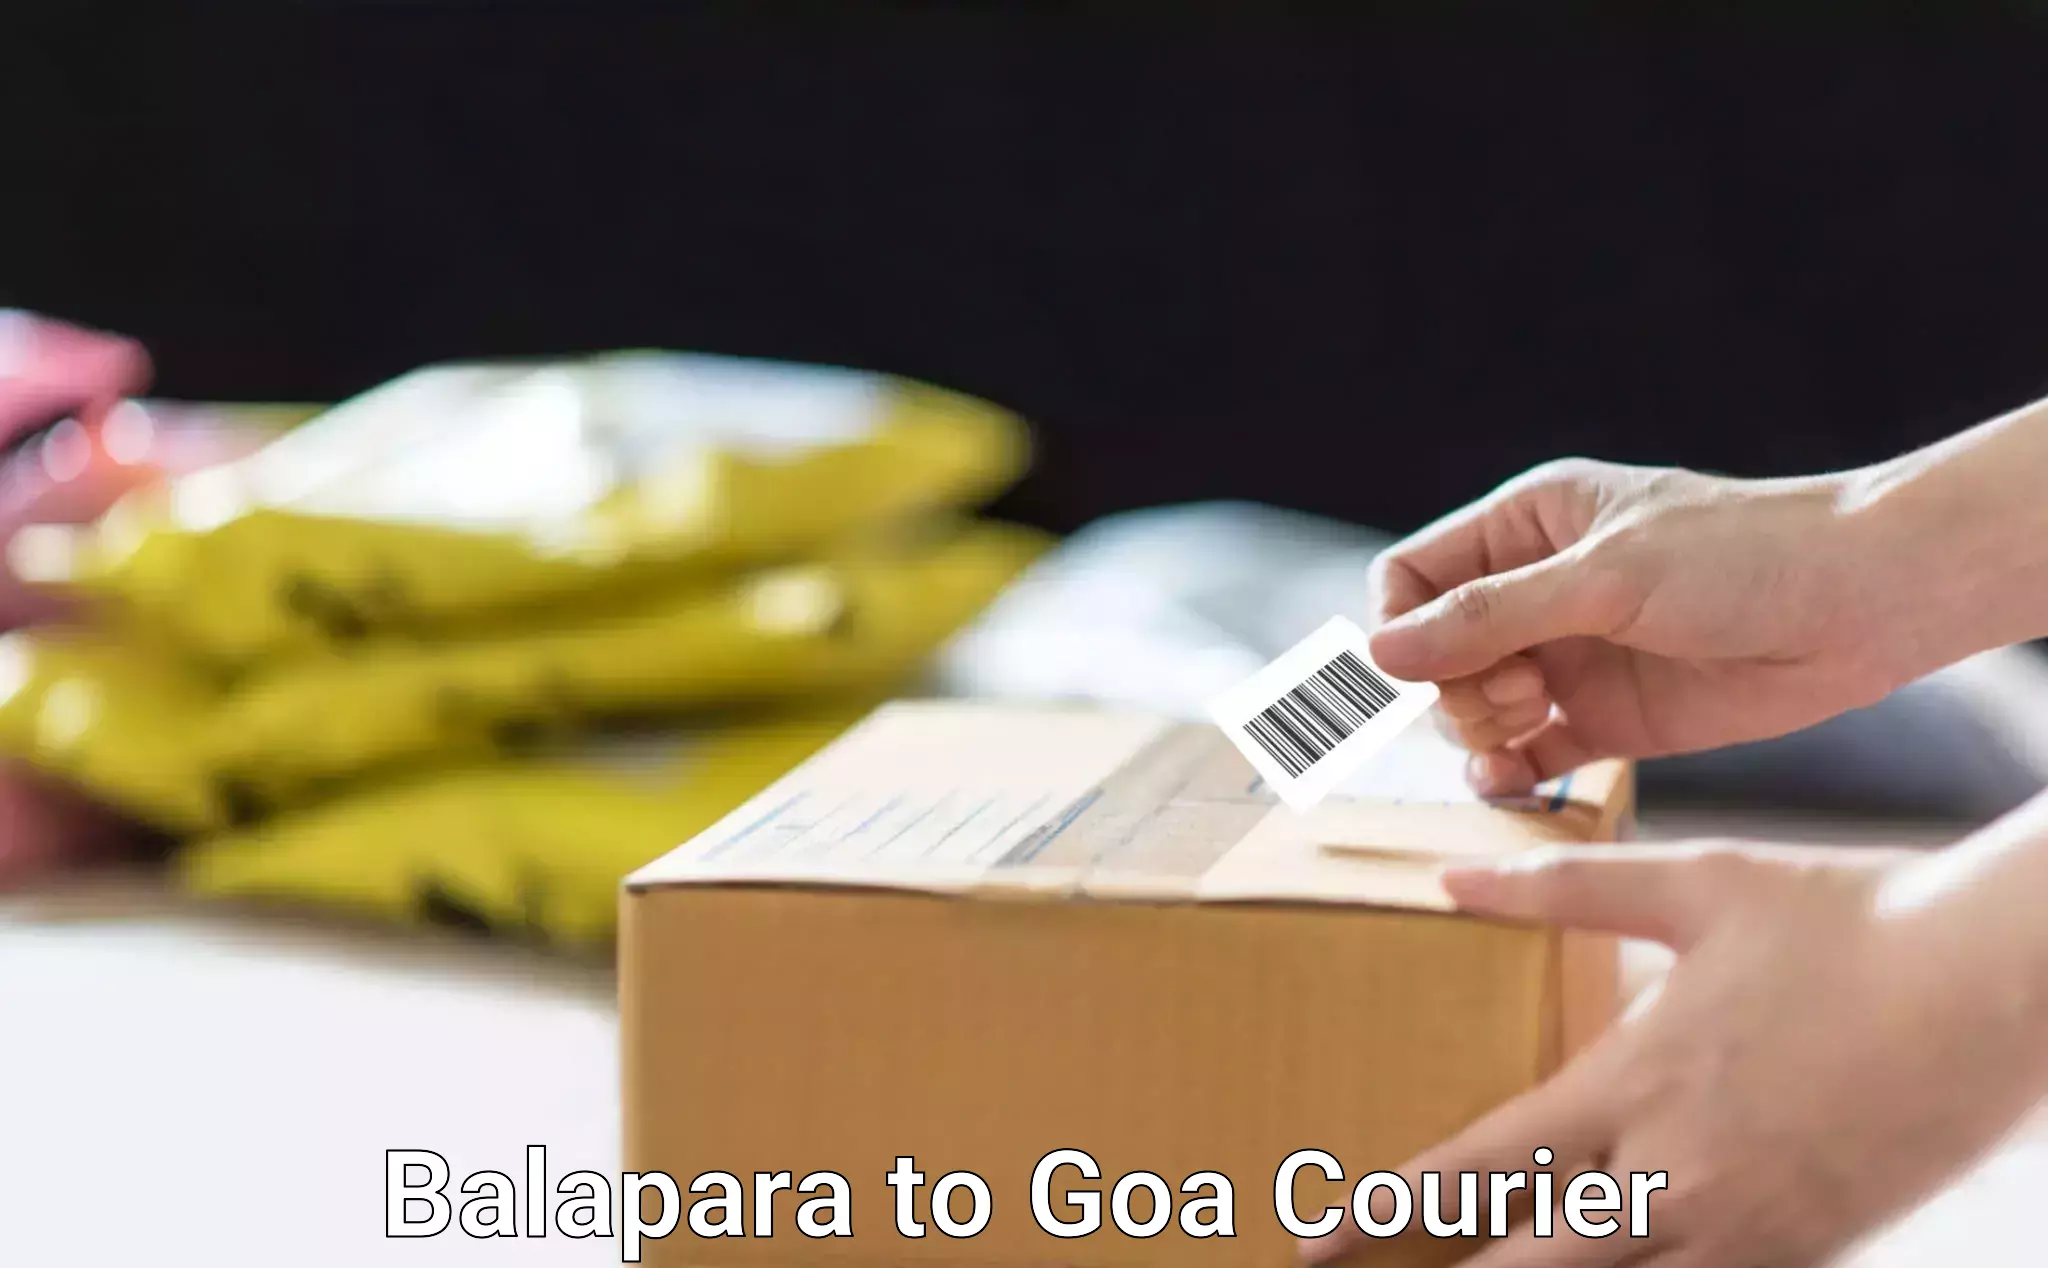 State-of-the-art courier technology Balapara to Margao